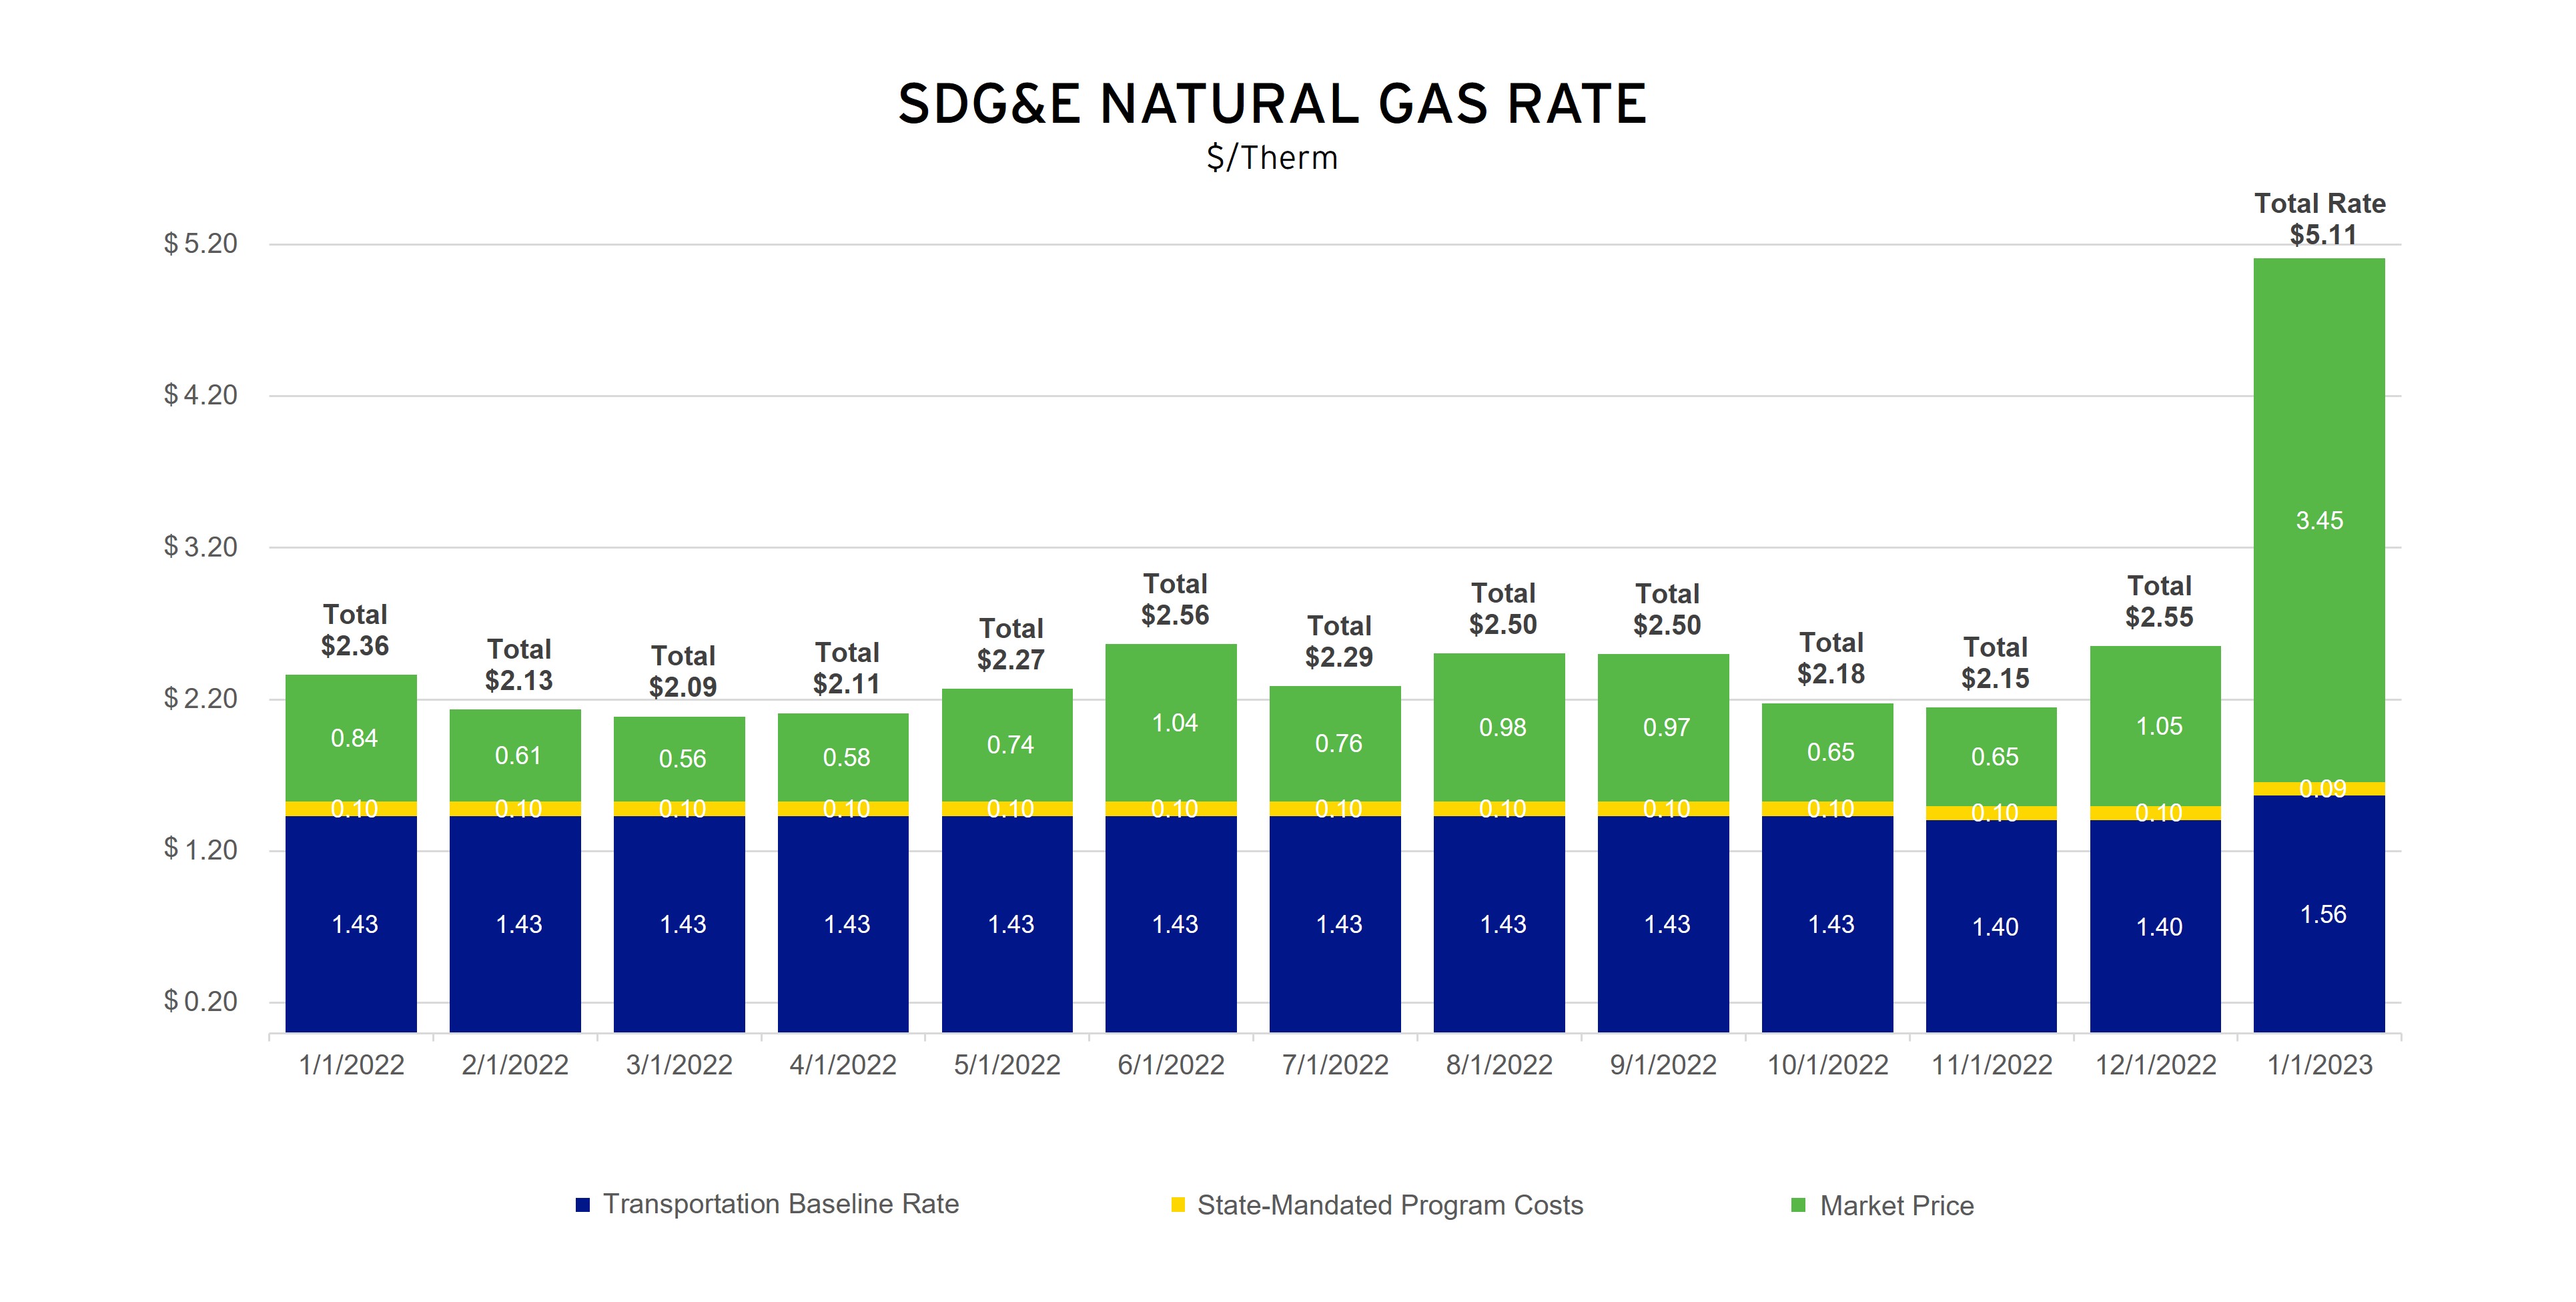 Rates 2023 Energy Rates and Who Sets Them San Diego Gas & Electric